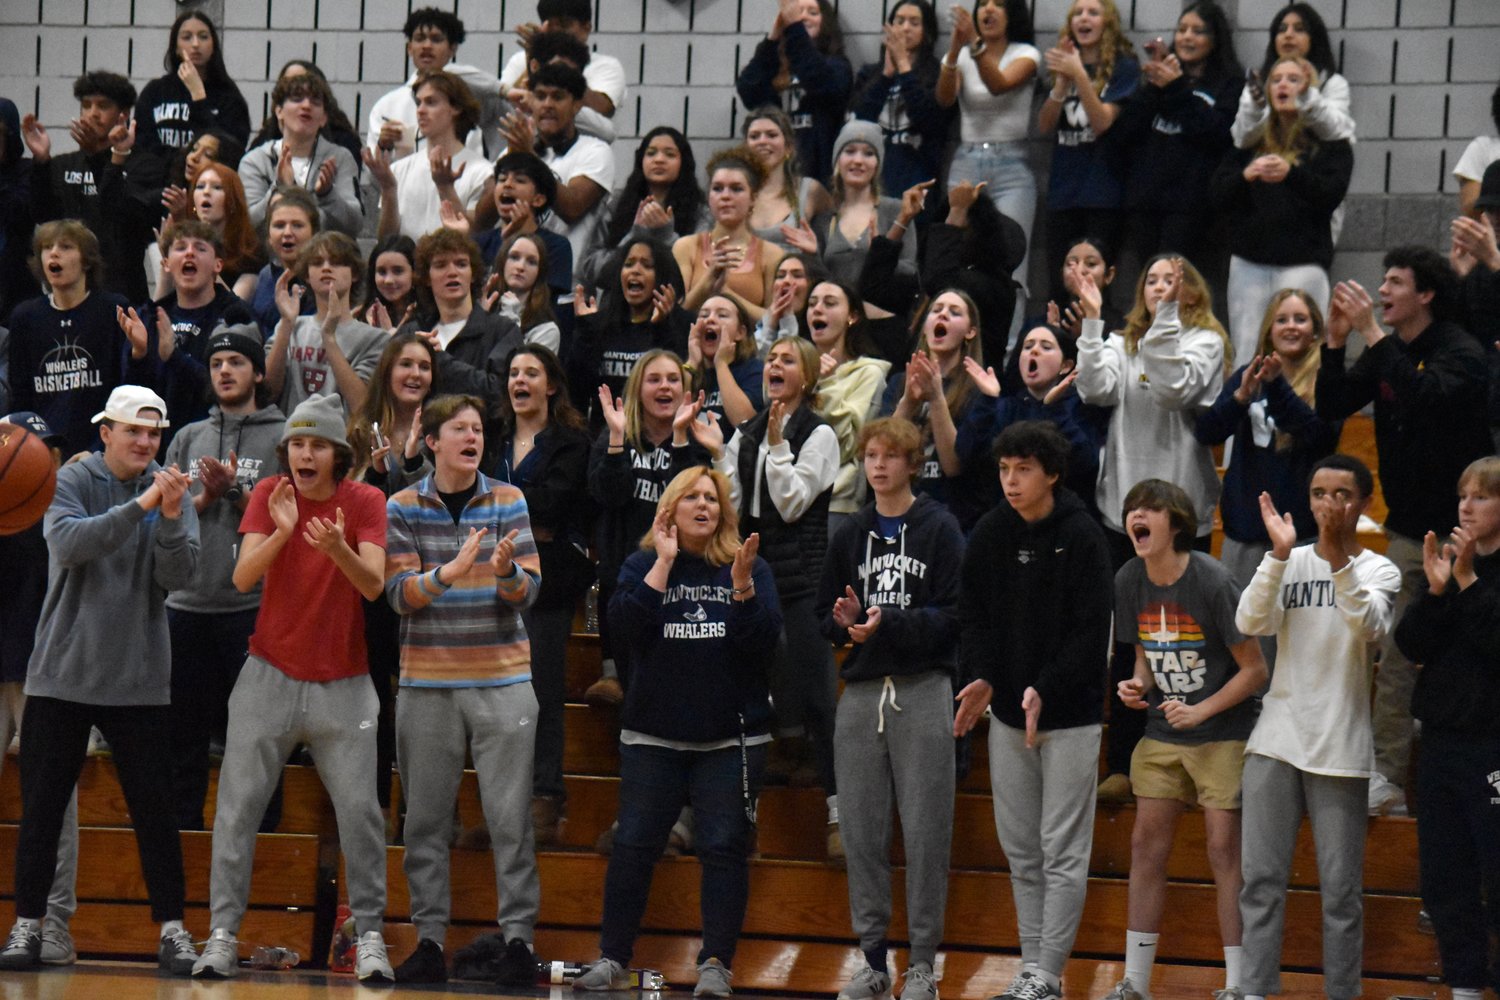 The student section celebrates a Nantucket basket.